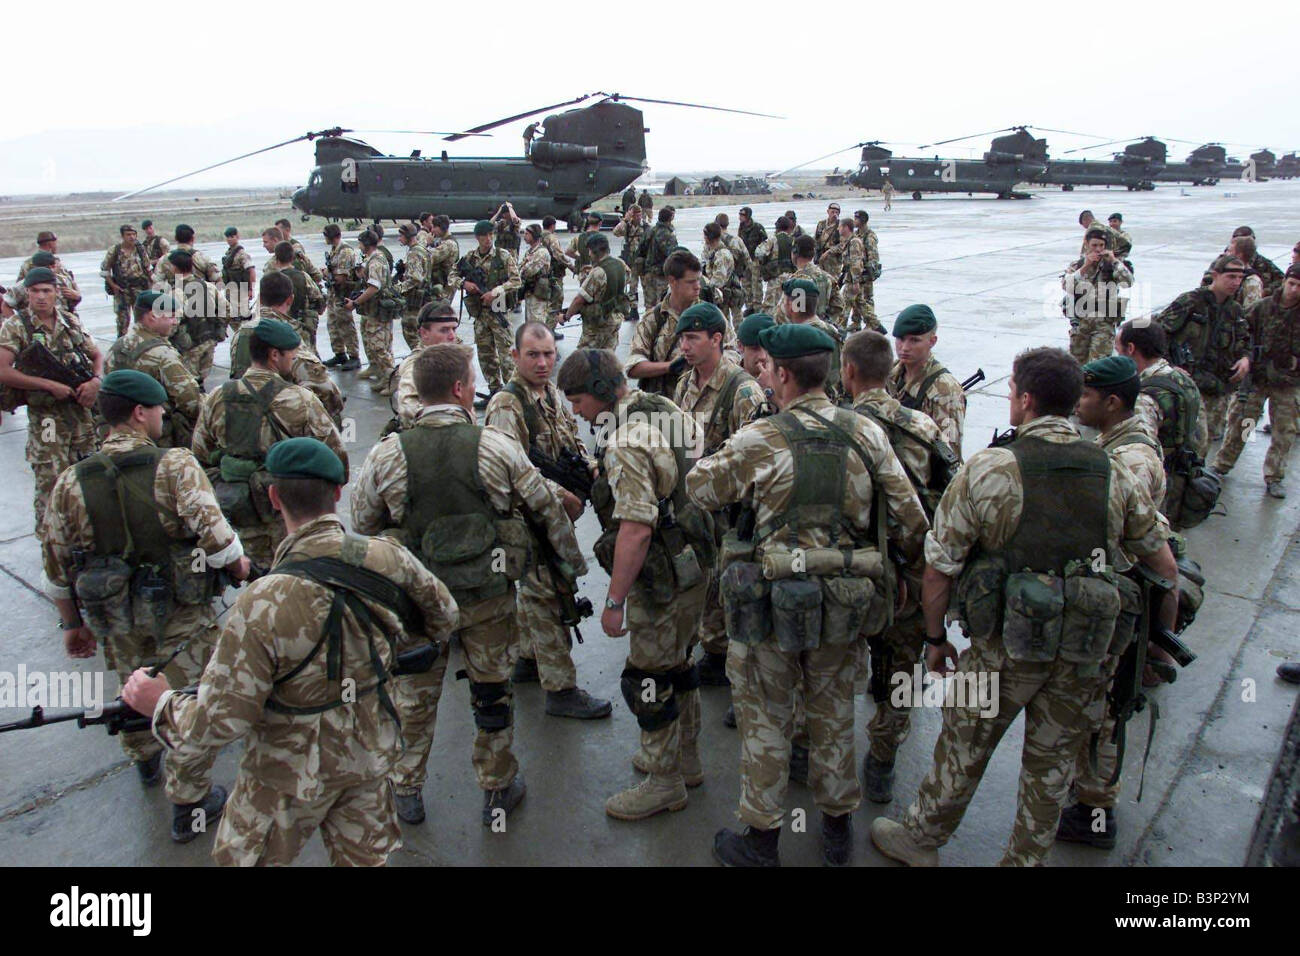 british-army-april-2002-forces-in-afghanistan-forces-in-afghanistan-B3P2YM.jpg